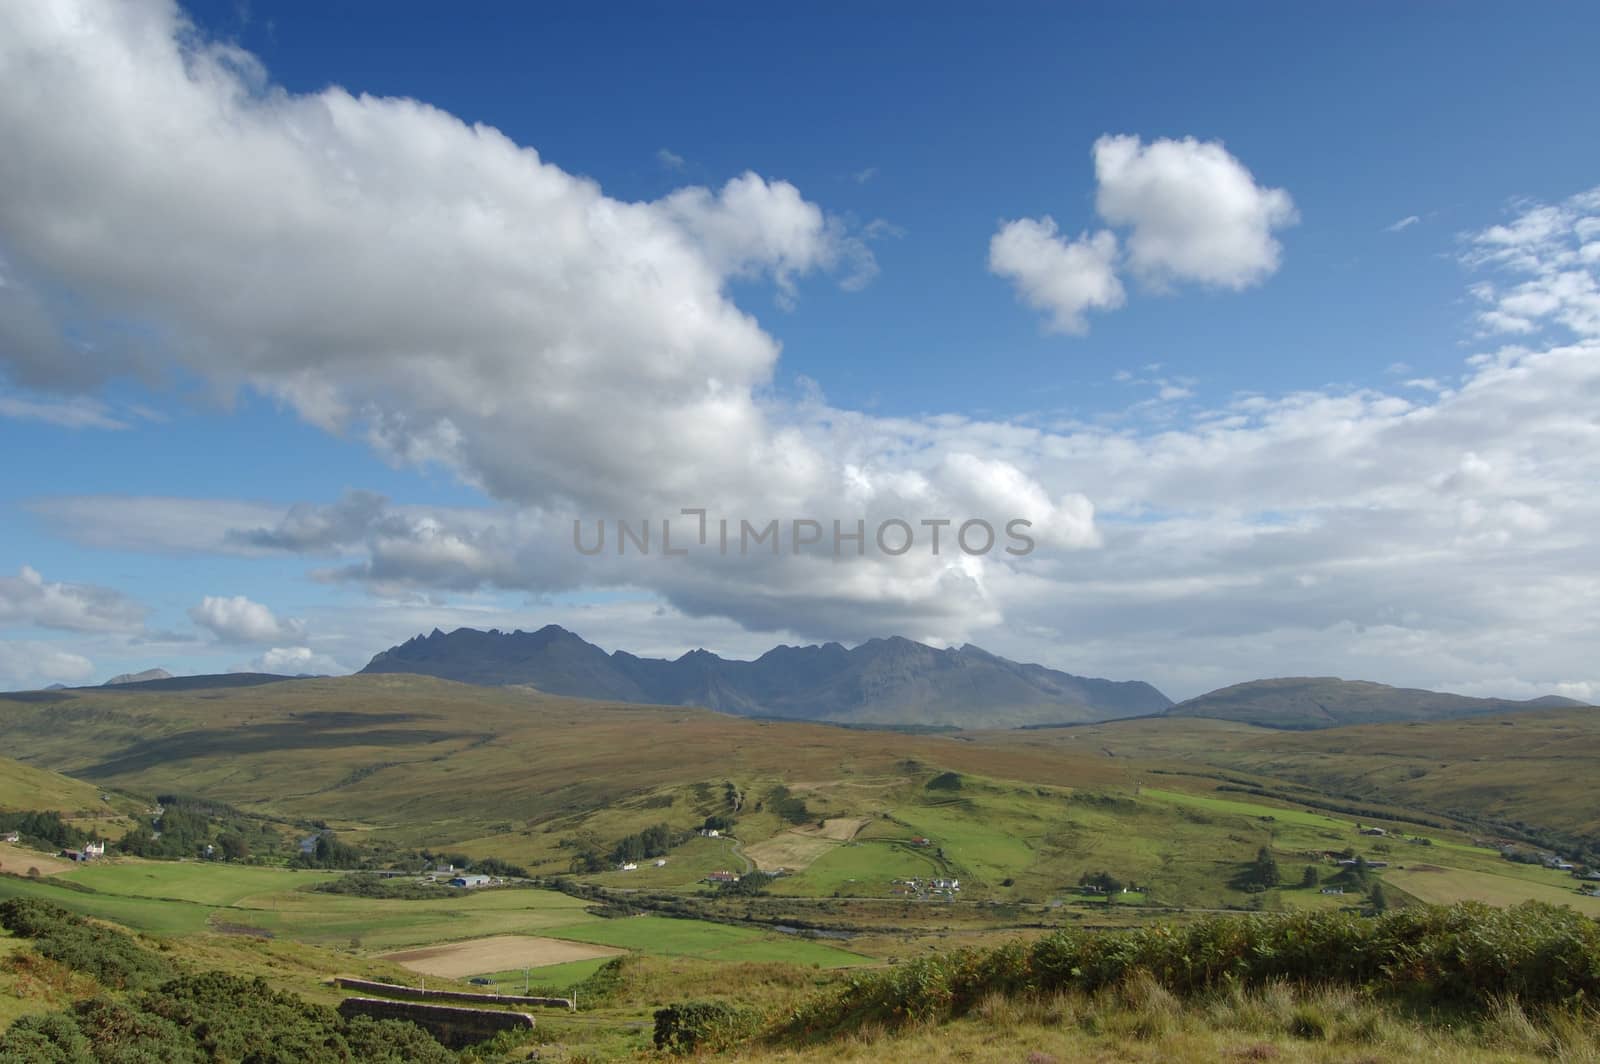 The Cuillins of Skye from a viewpoint near Carbostmore on the west coast